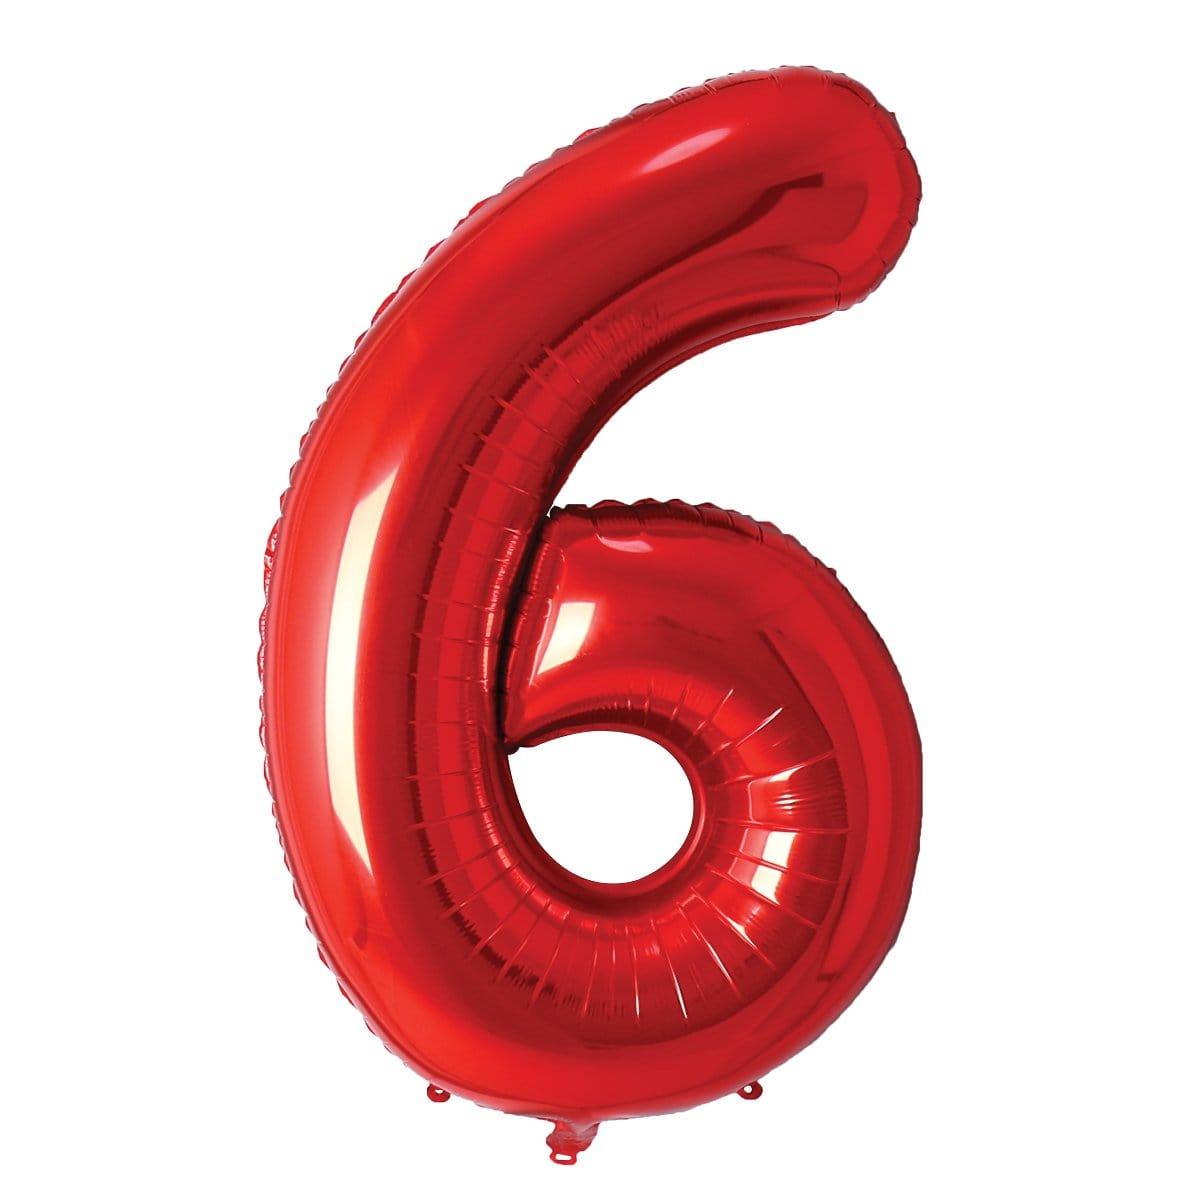 Buy Balloons Red Number 6 Foil Balloon, 34 Inches sold at Party Expert